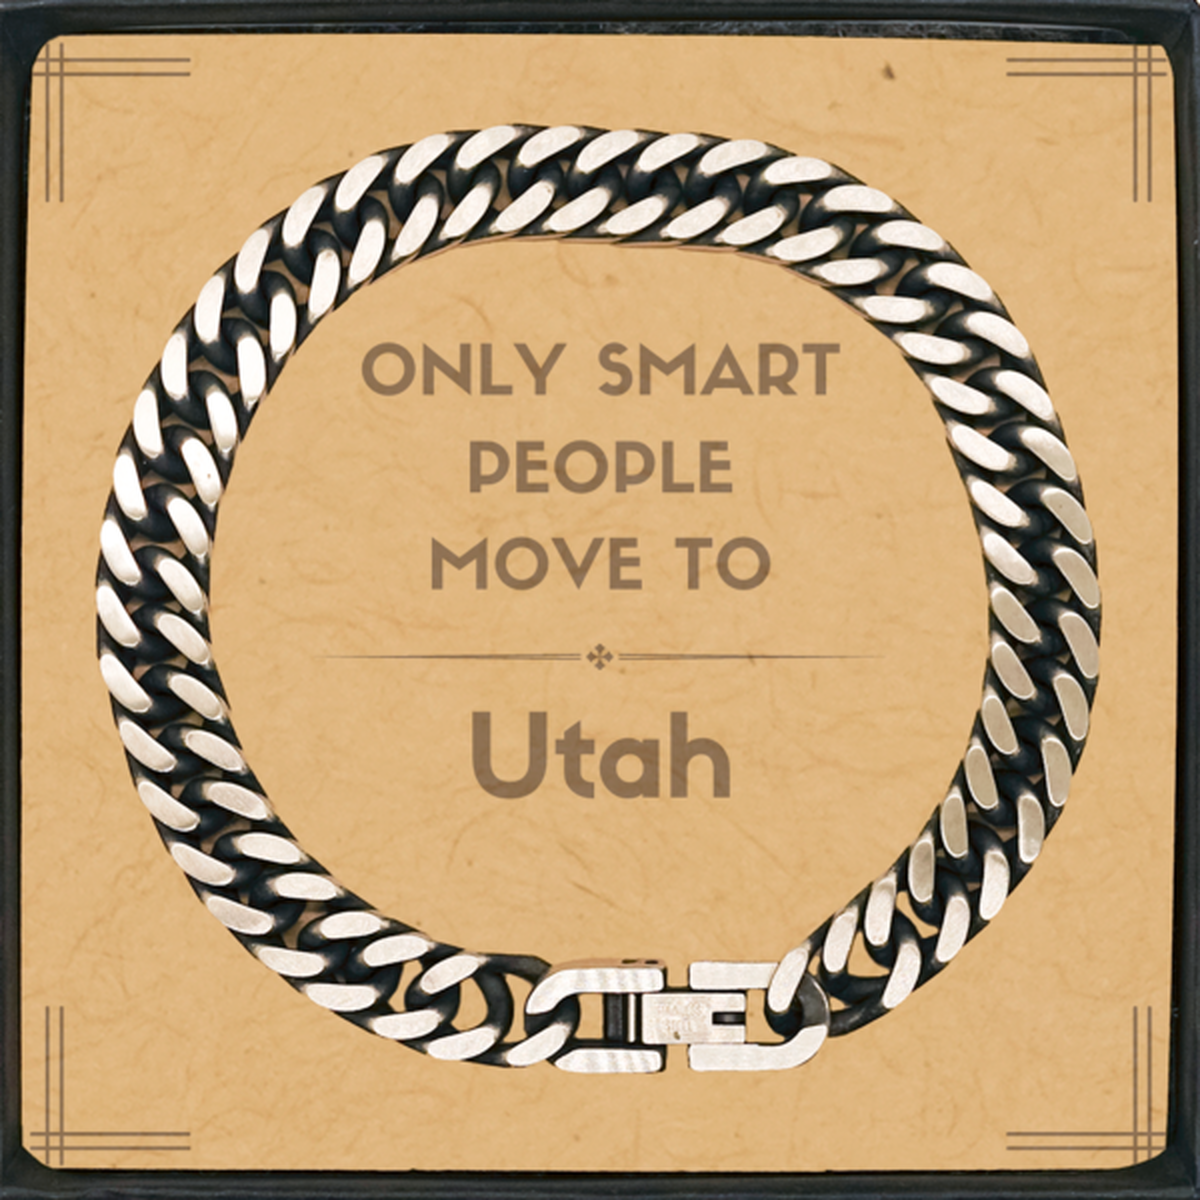 Only smart people move to Utah Cuban Link Chain Bracelet, Message Card Gifts For Utah, Move to Utah Gifts for Friends Coworker Funny Saying Quote